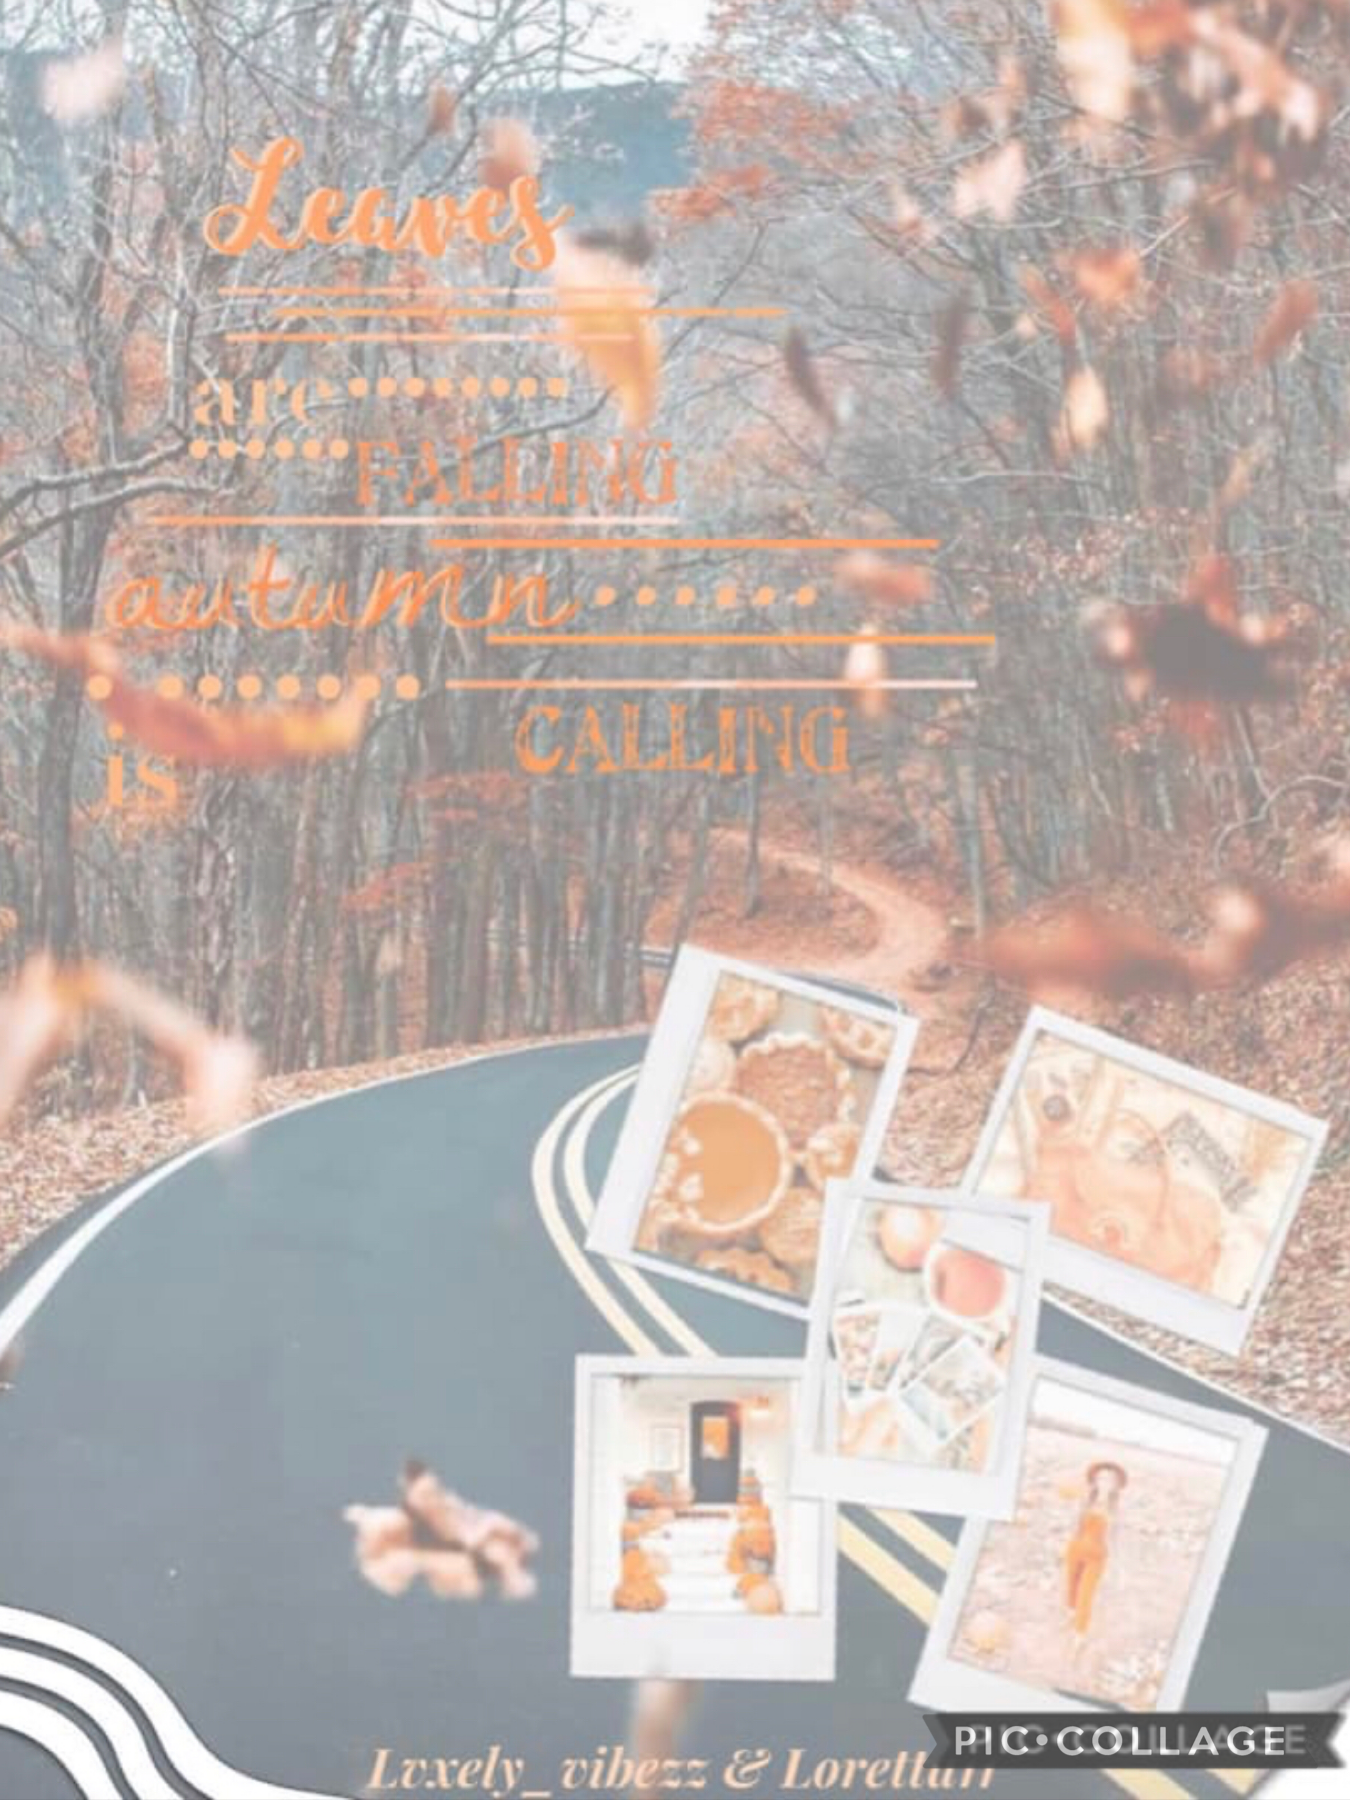 Tap to view 🍂 
10/9/21 Collab with loretta11 I did text they did background your so talented! 🧡